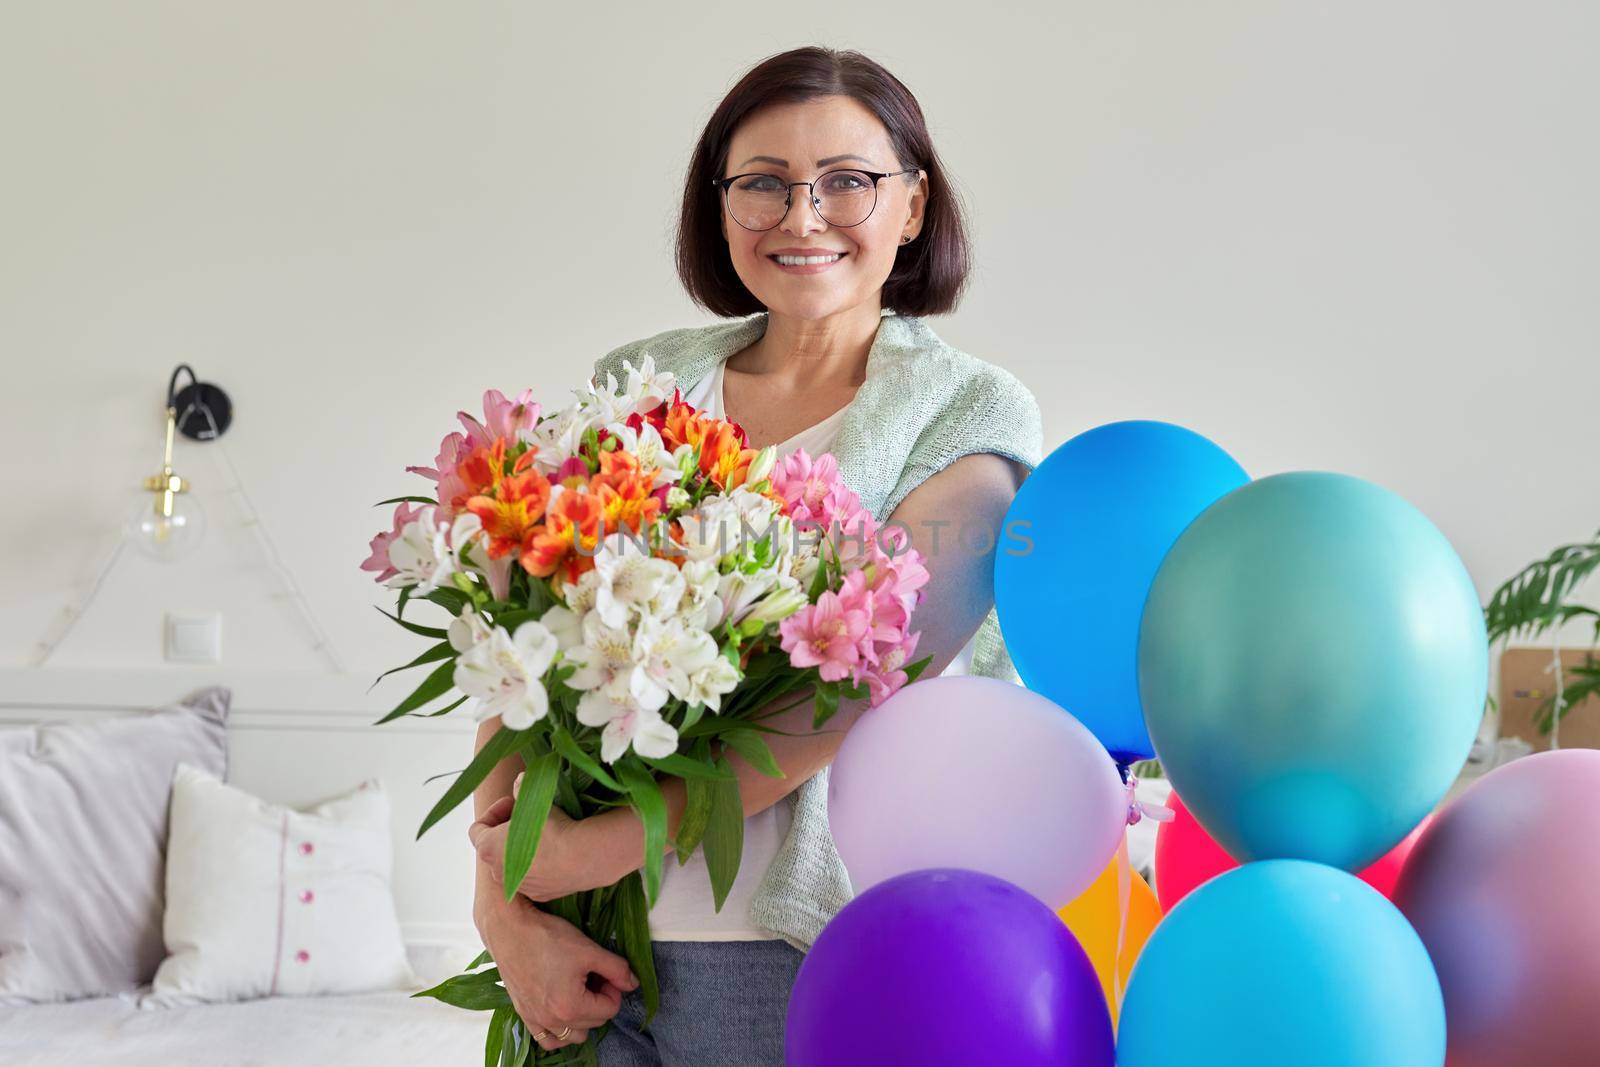 Birthday, 45 years old, happy middle-aged female with bouquet of flowers and balloons at home in the room. Mature age, celebration, anniversary, people concept